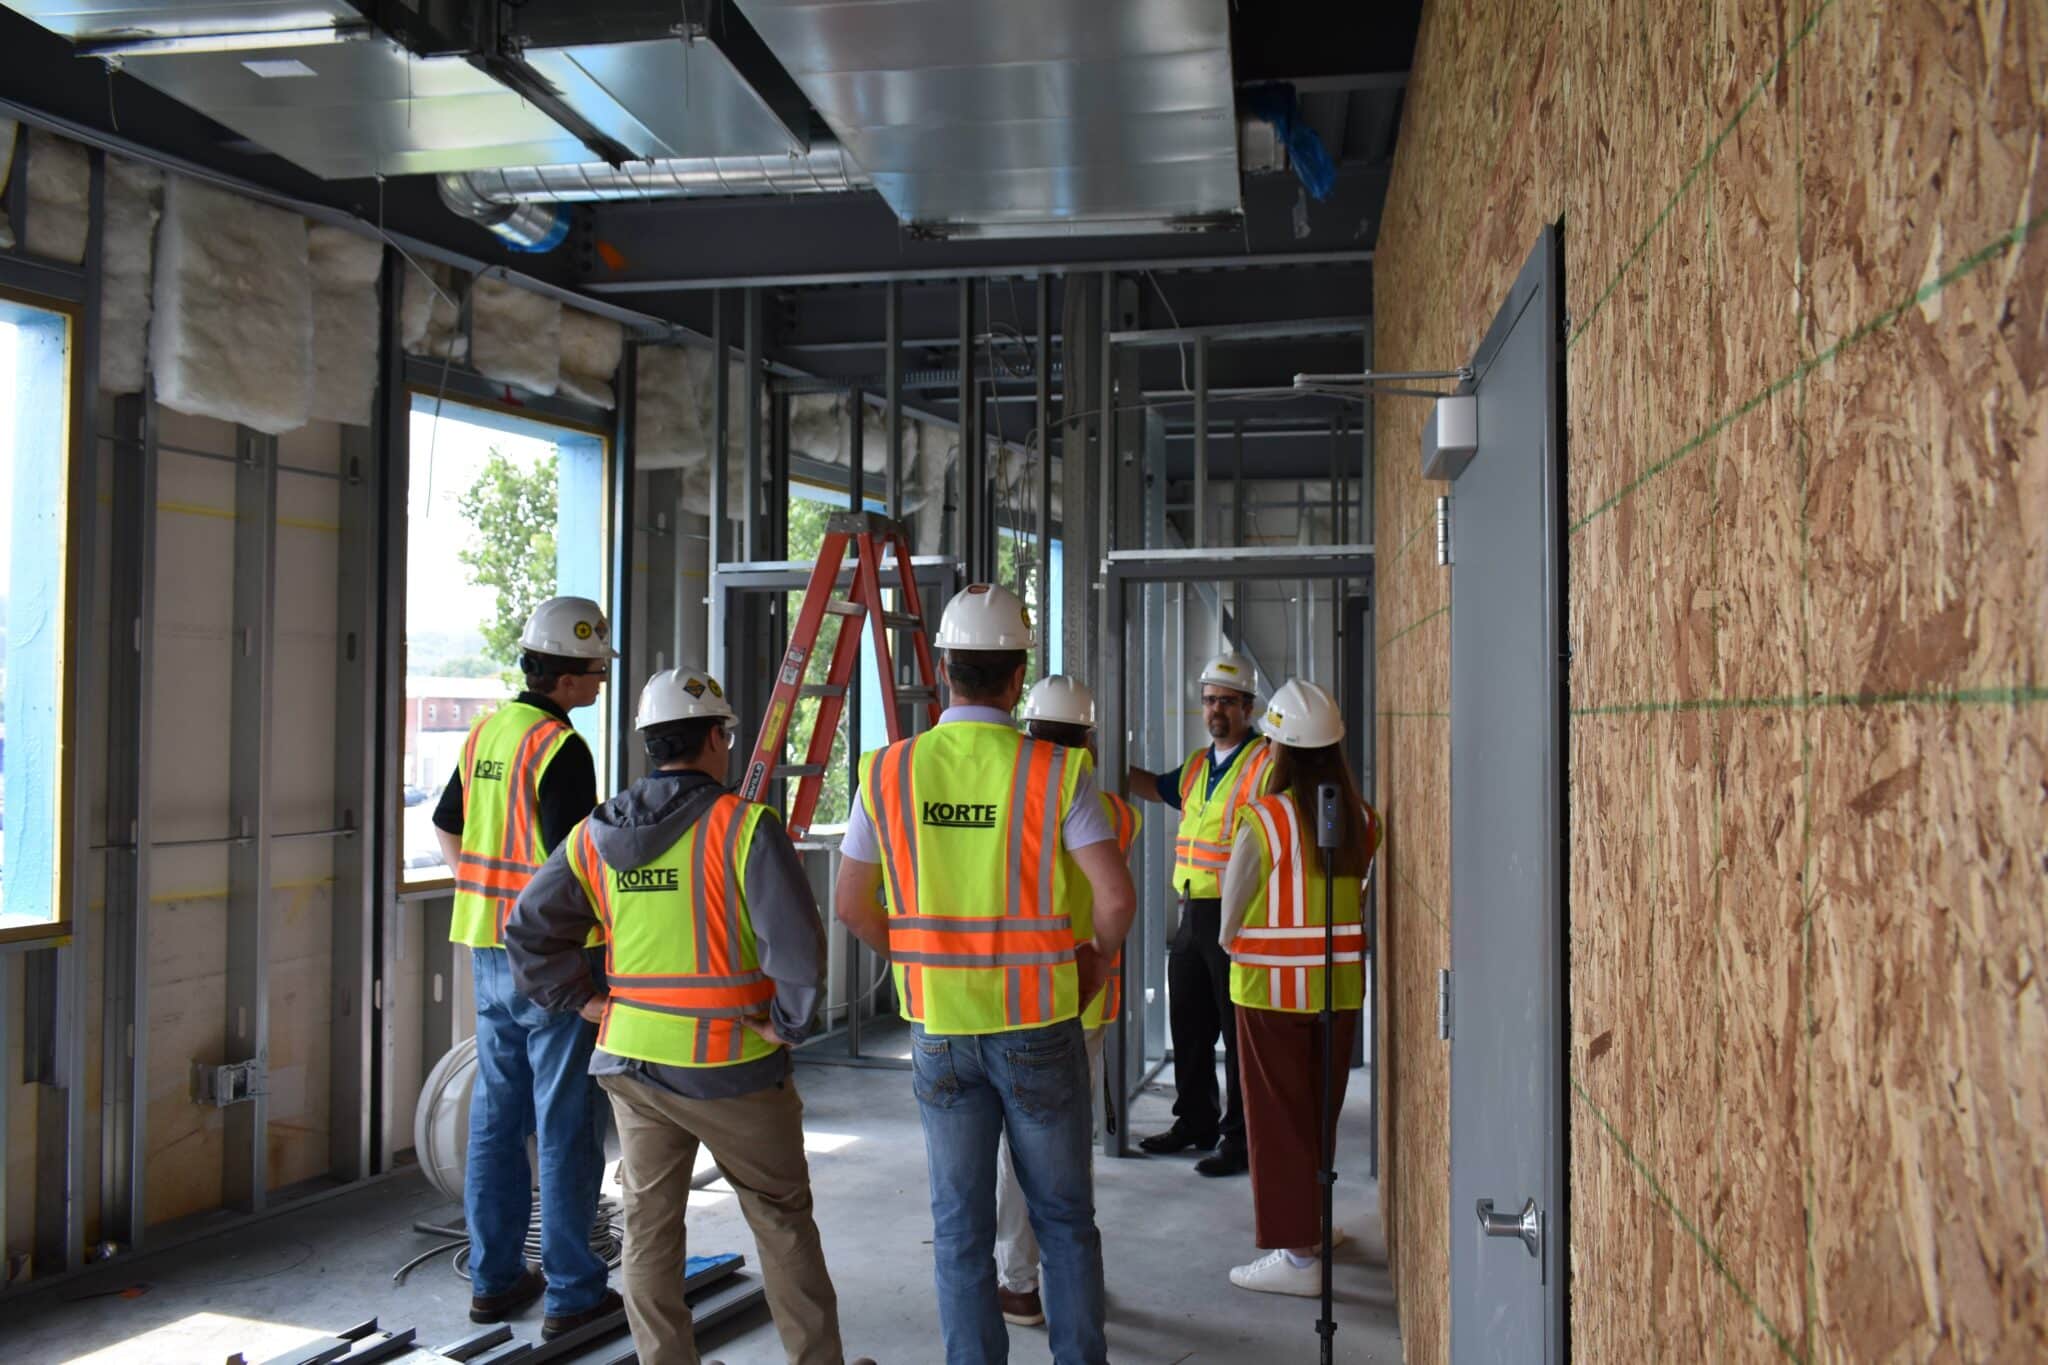 Group of Korte interns in yellow safety vests and hard hats at an indoor job site.